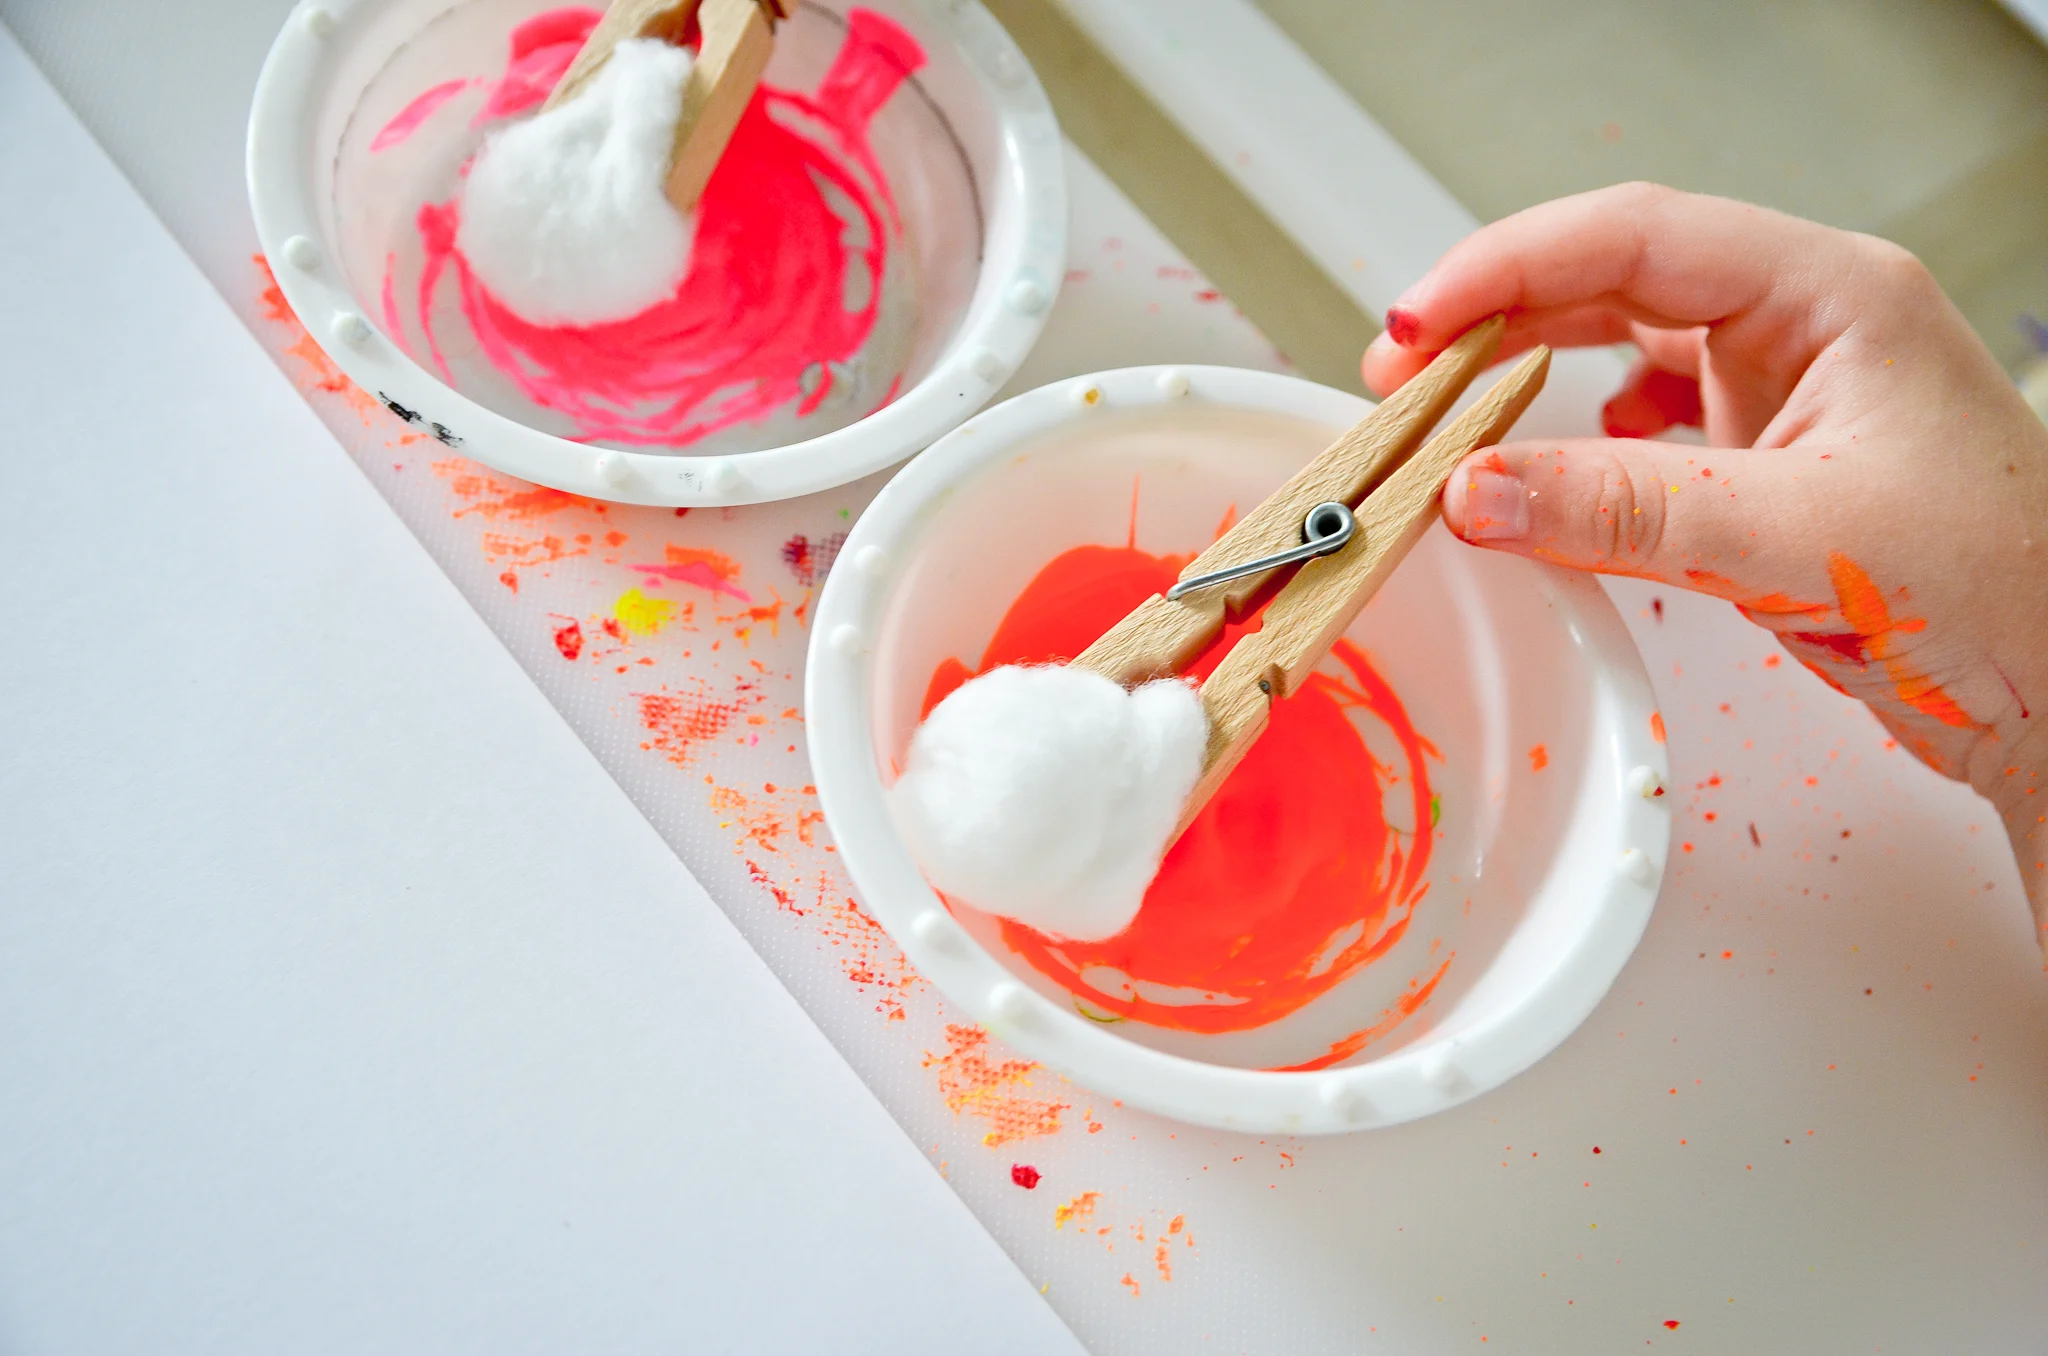 Tips for Painting with Toddlers